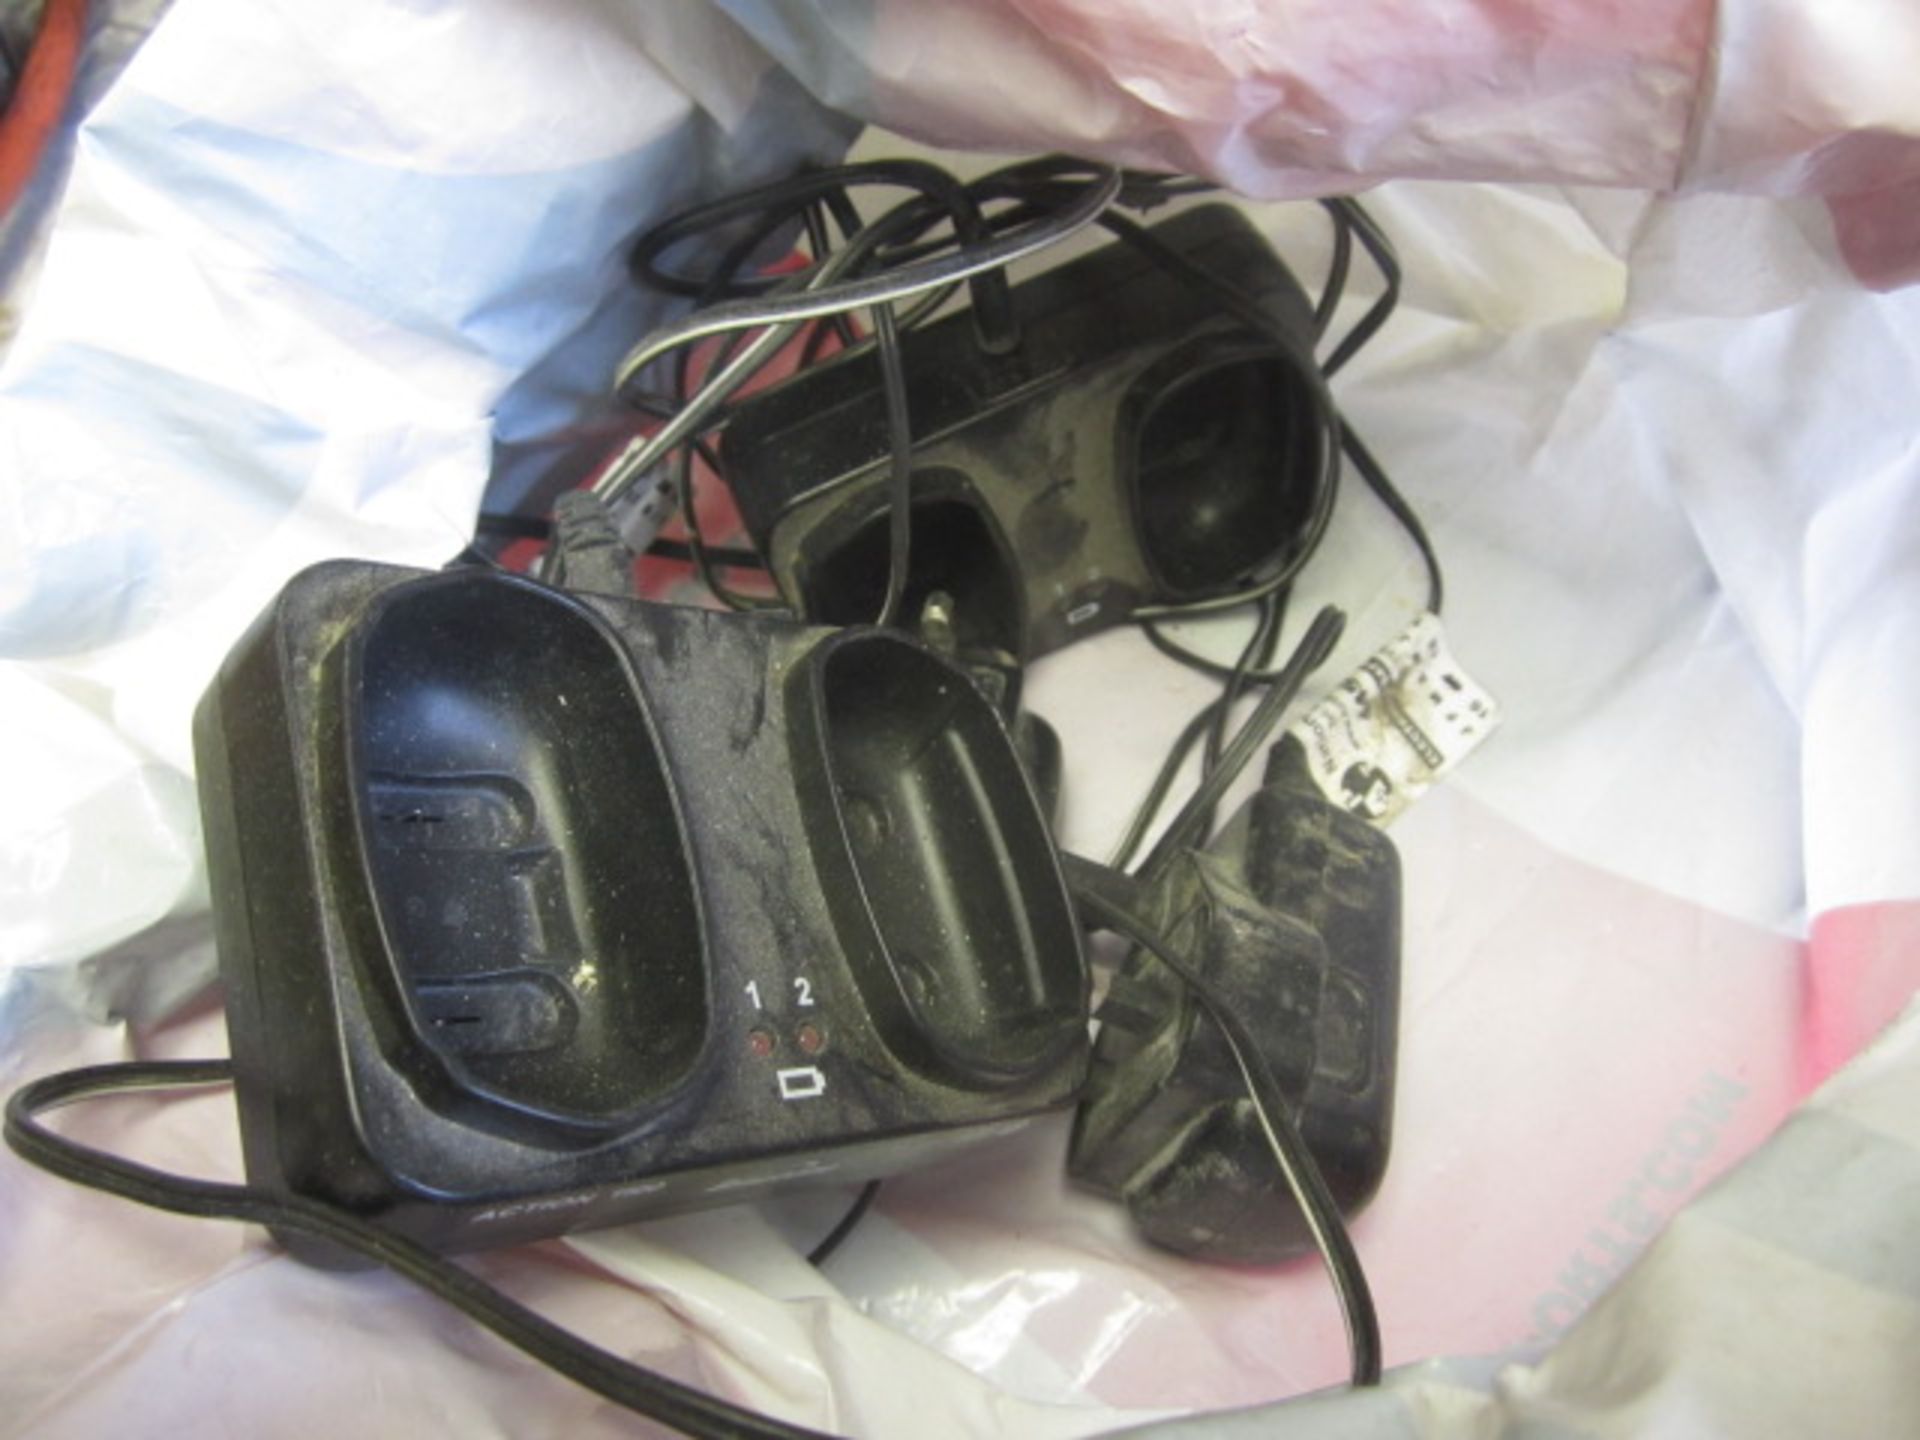 4 x Binatone Action 100 walkie talkies with 2 x double base stations. Located: AC Interiors, Unit - Image 2 of 2